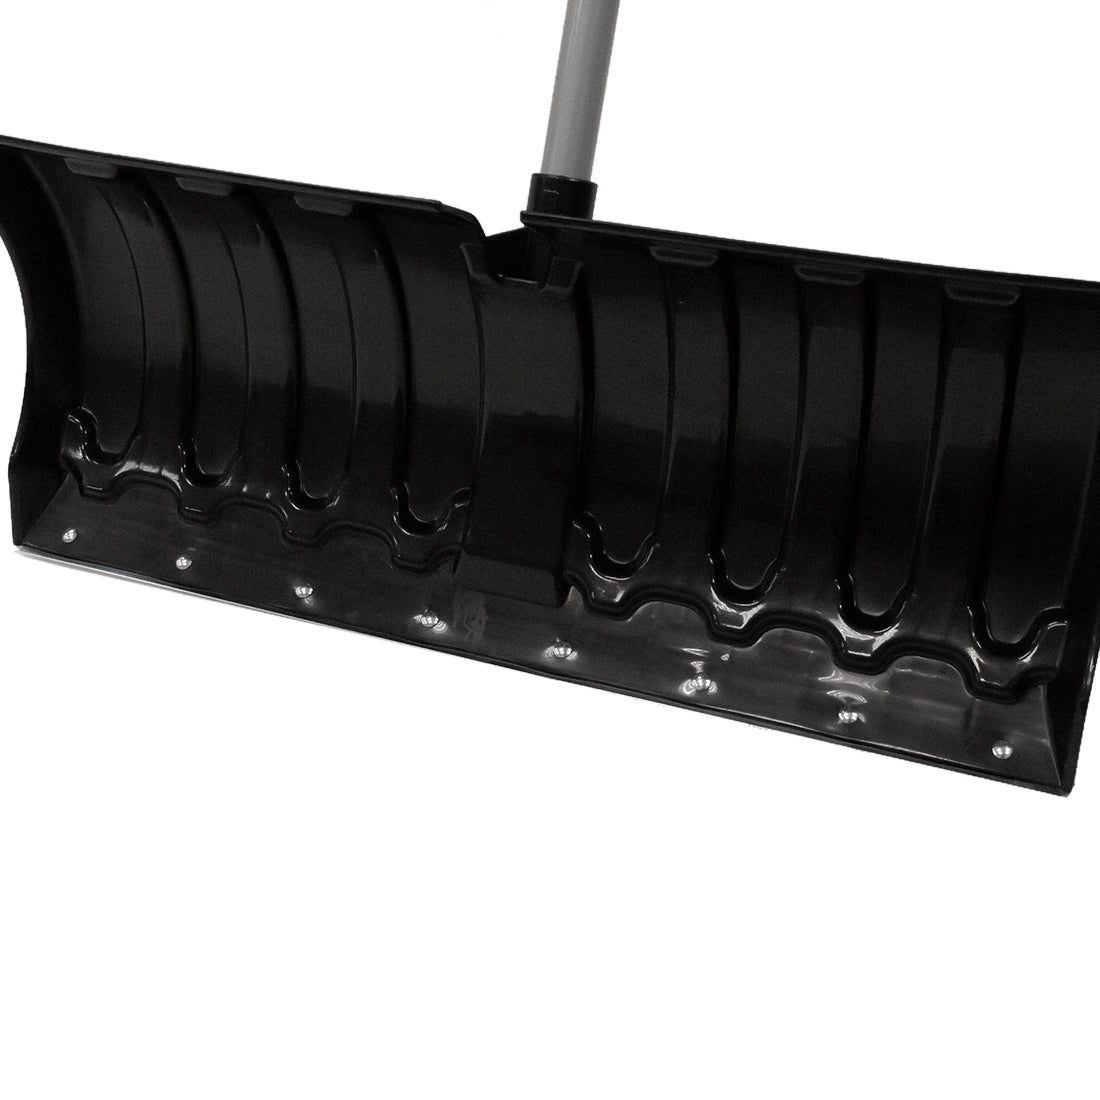 Snow Pusher Shovel 26” Poly Blade with Metal Edge